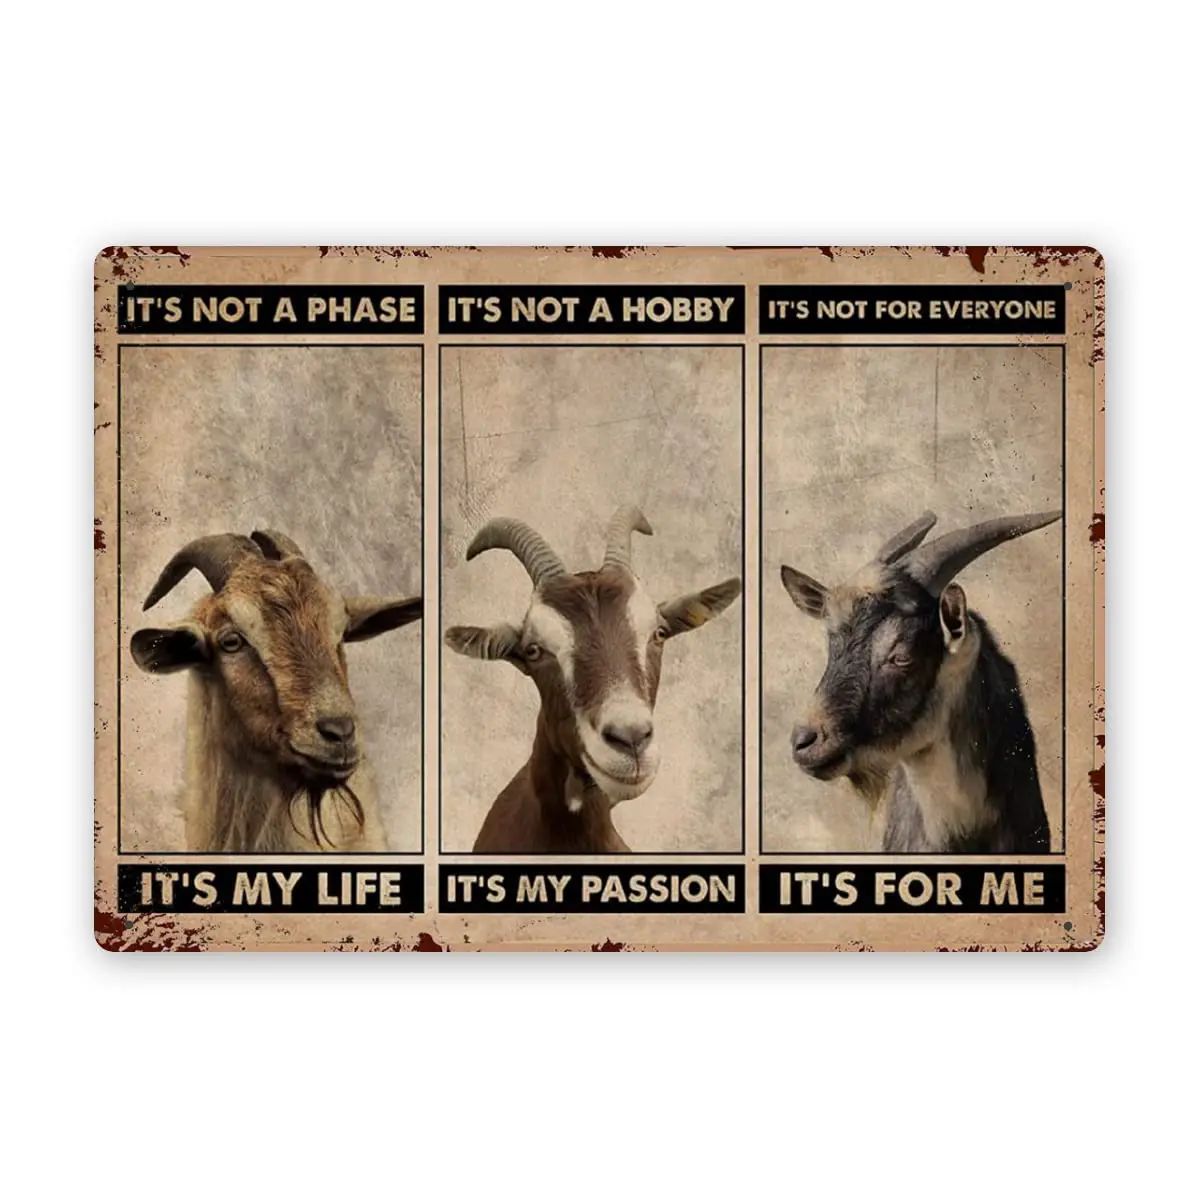 

Goat Art Wall Decor Goat Signs Decor Goat Metal Sign Goat Signs for Outside Barn Goat Decorations Outdoor Goat it's Not A Ph